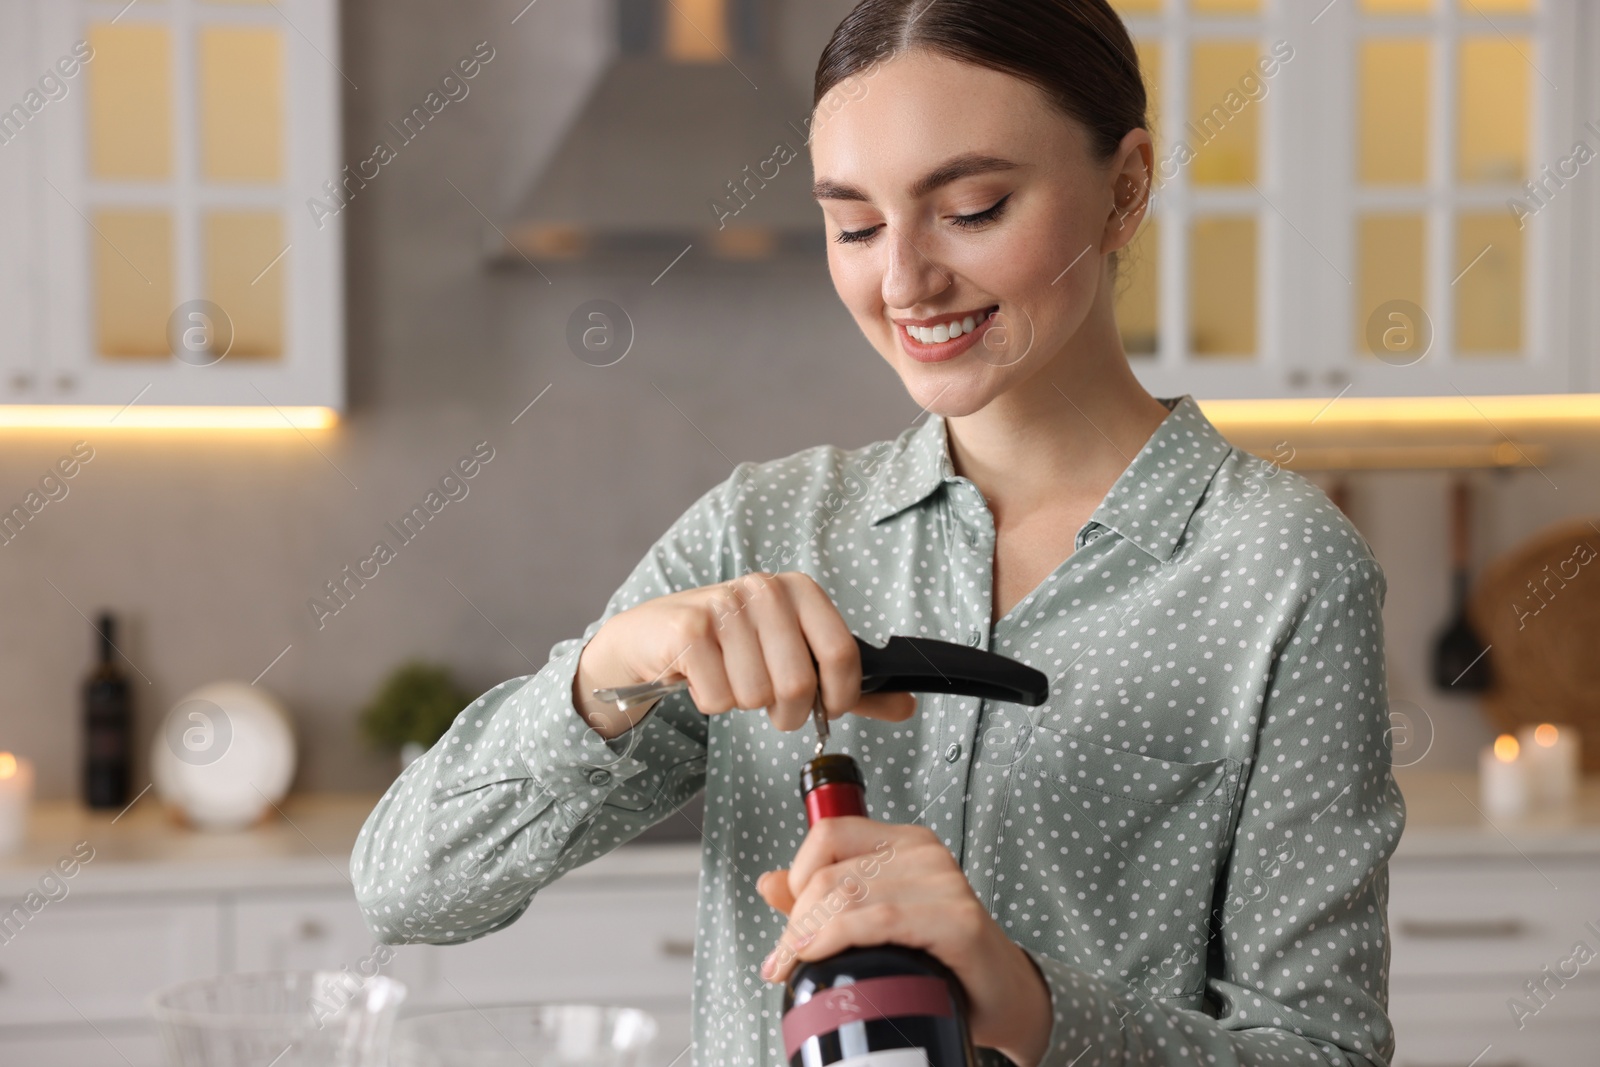 Photo of Woman opening wine bottle with corkscrew in kitchen